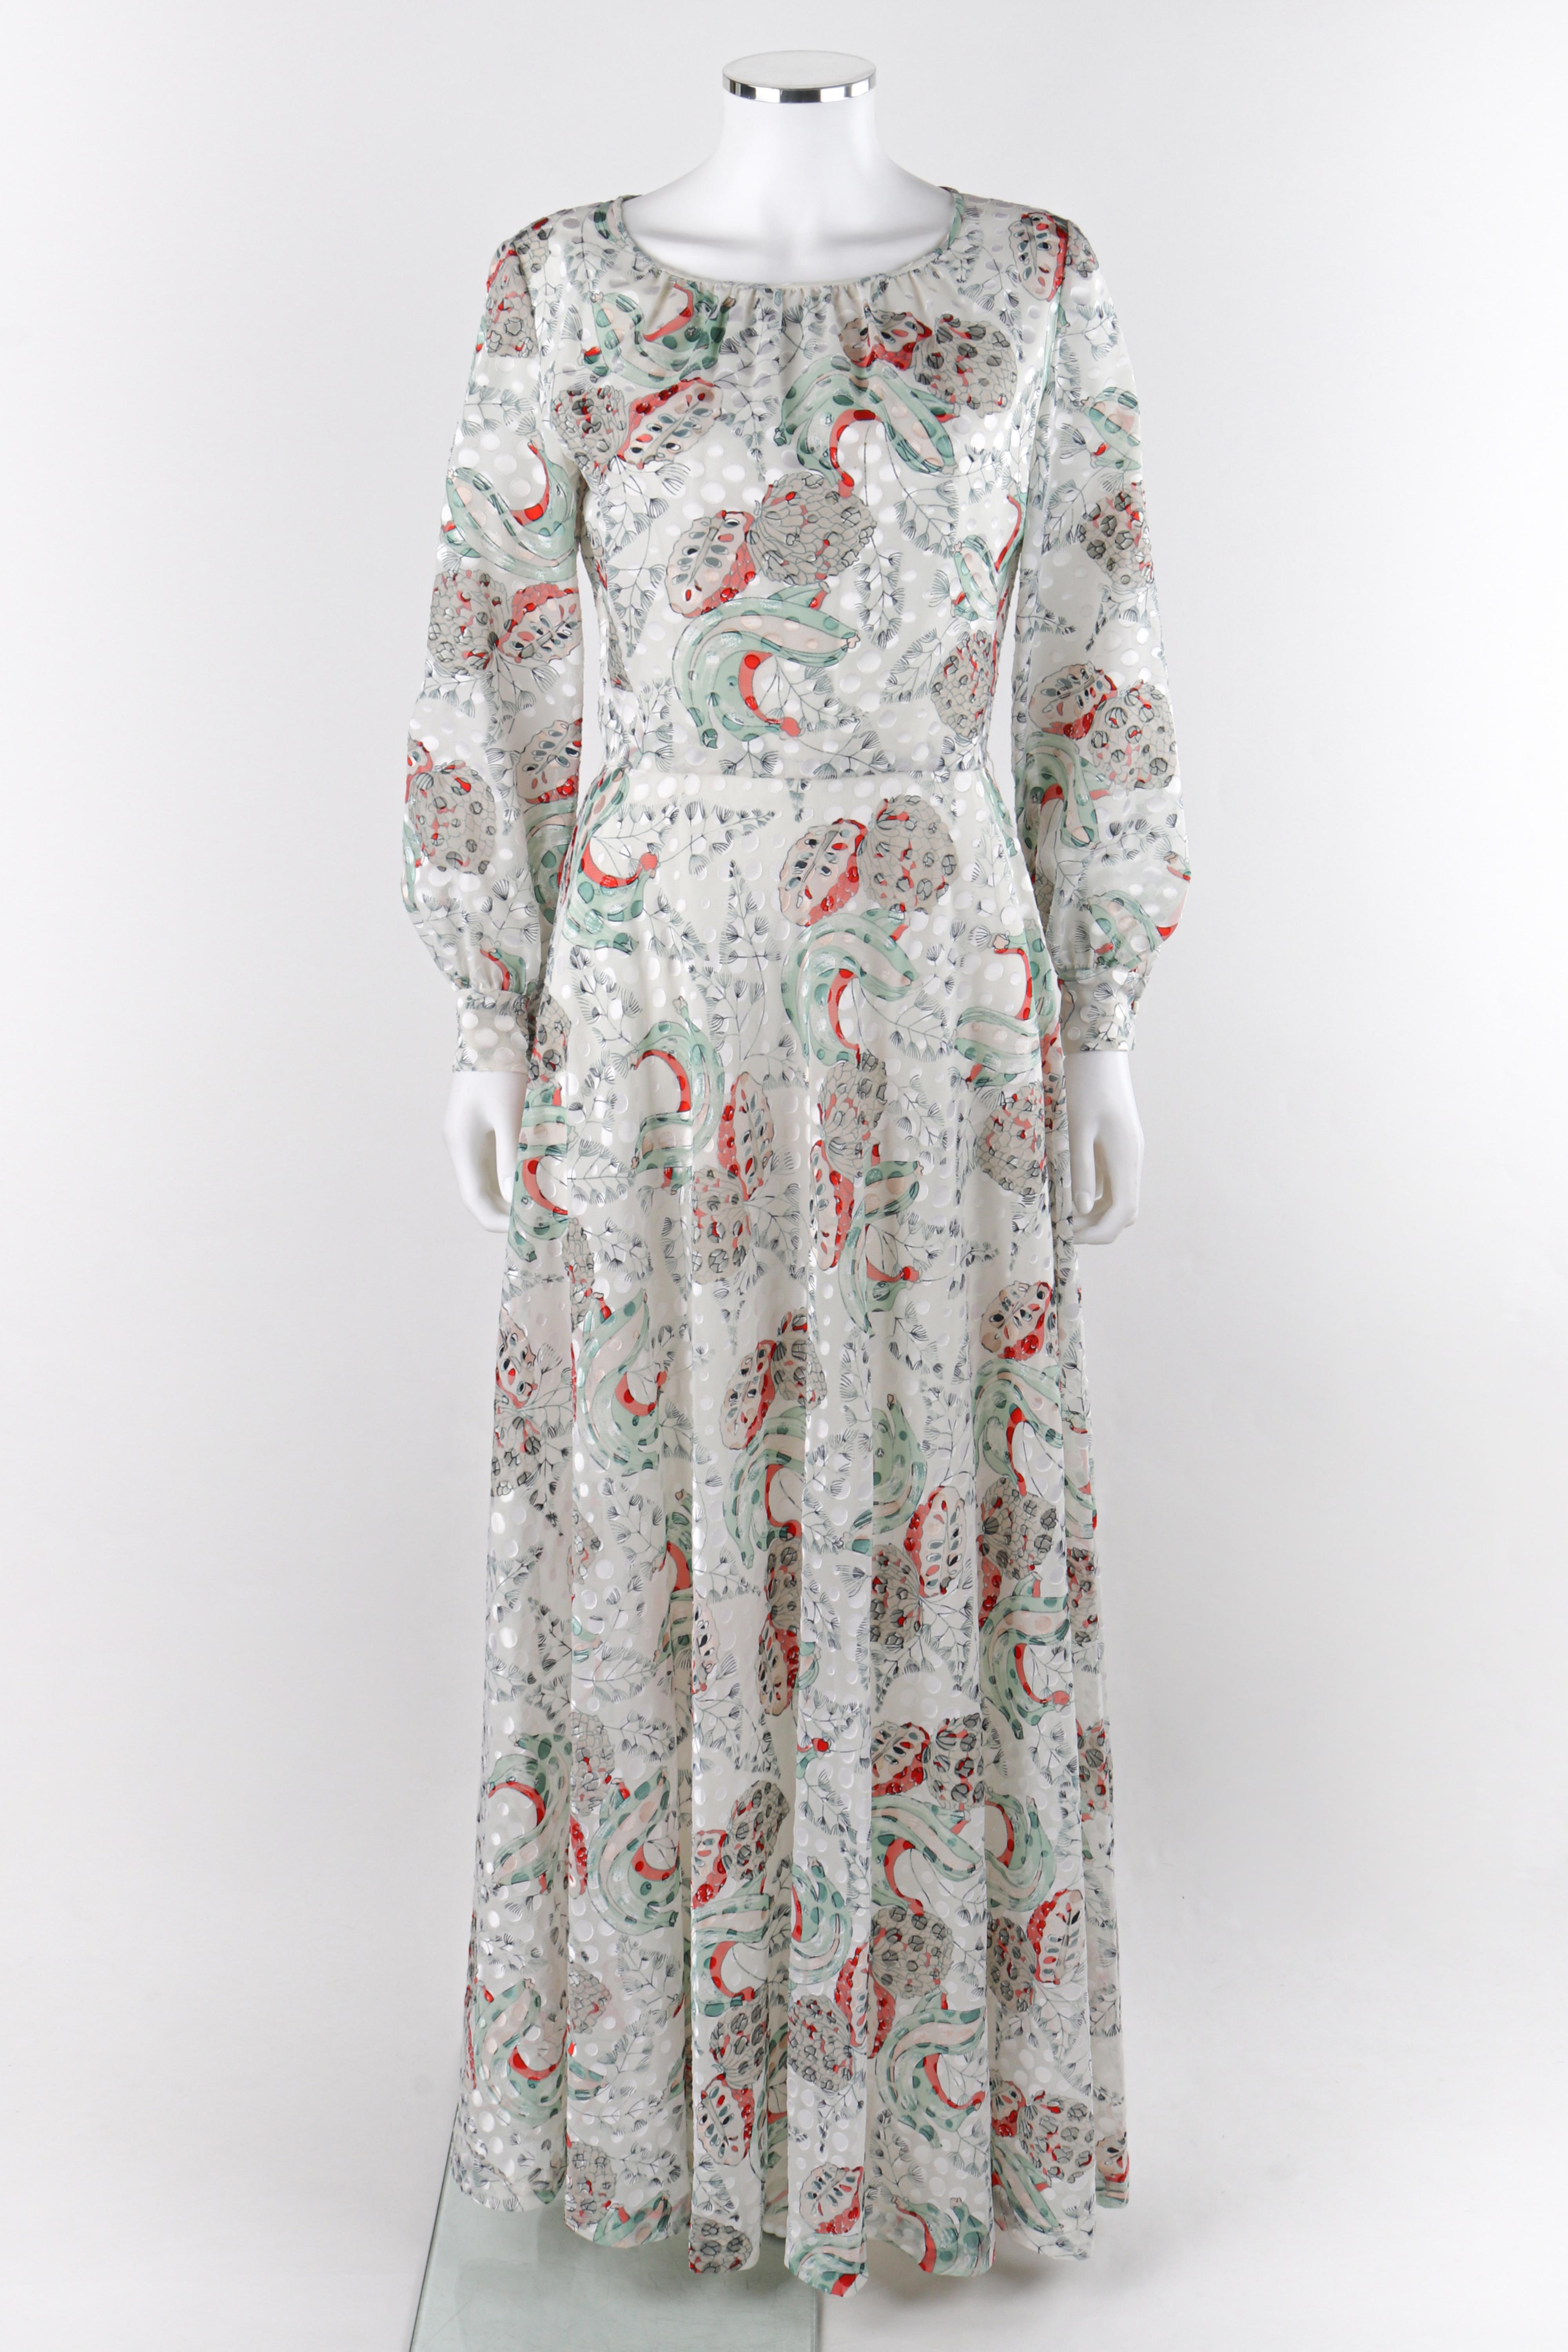 ADELE SIMPSON c.1970’s White Multicolor Floral Fruit Print Belted Maxi Day Dress

Circa: 1970’s
Label(s): Adele Simpson
Designer: Adele Simpson
Style: Maxi dress
Color(s): Shades of white, gray, green, red, and beige
Lined: Yes
Unmarked Fabric